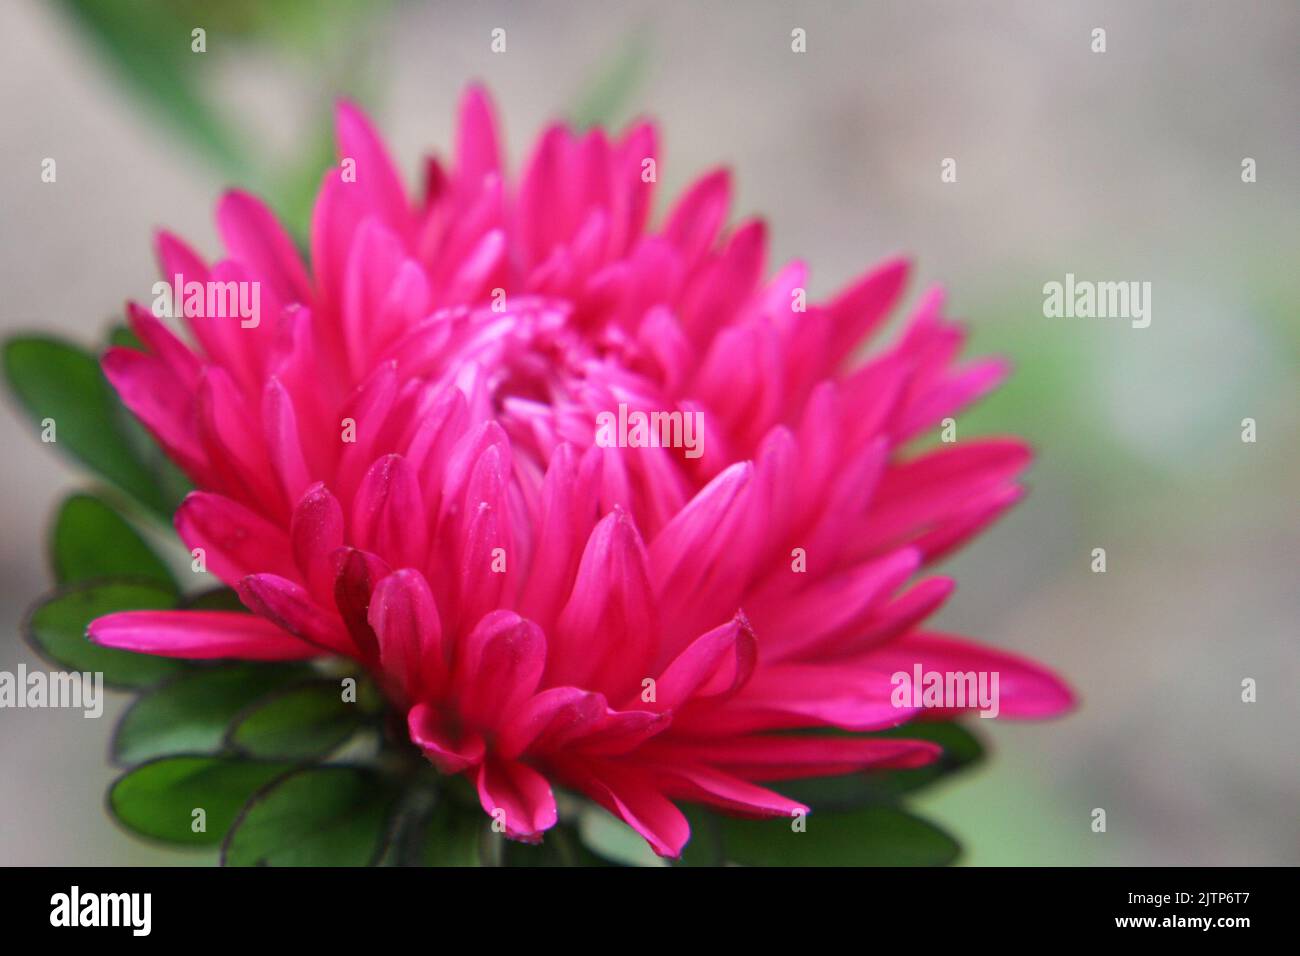 China aster or annual aster (Callistephus chinensis) bright pink flower close up Stock Photo